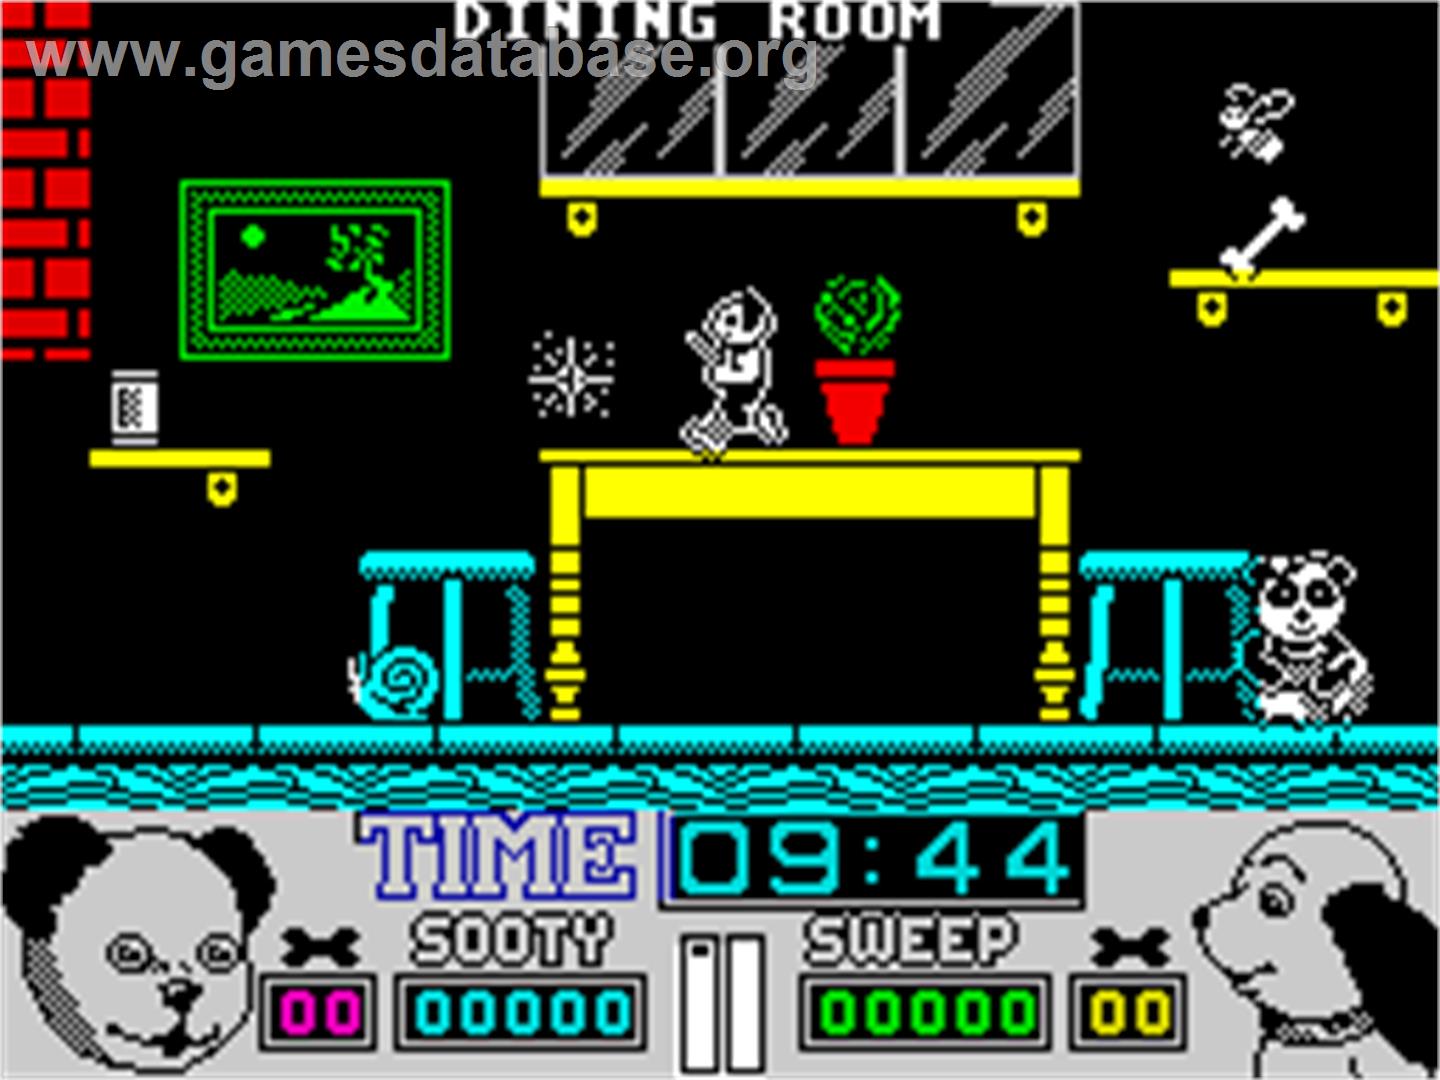 Snoopy and Peanuts - Sinclair ZX Spectrum - Artwork - In Game